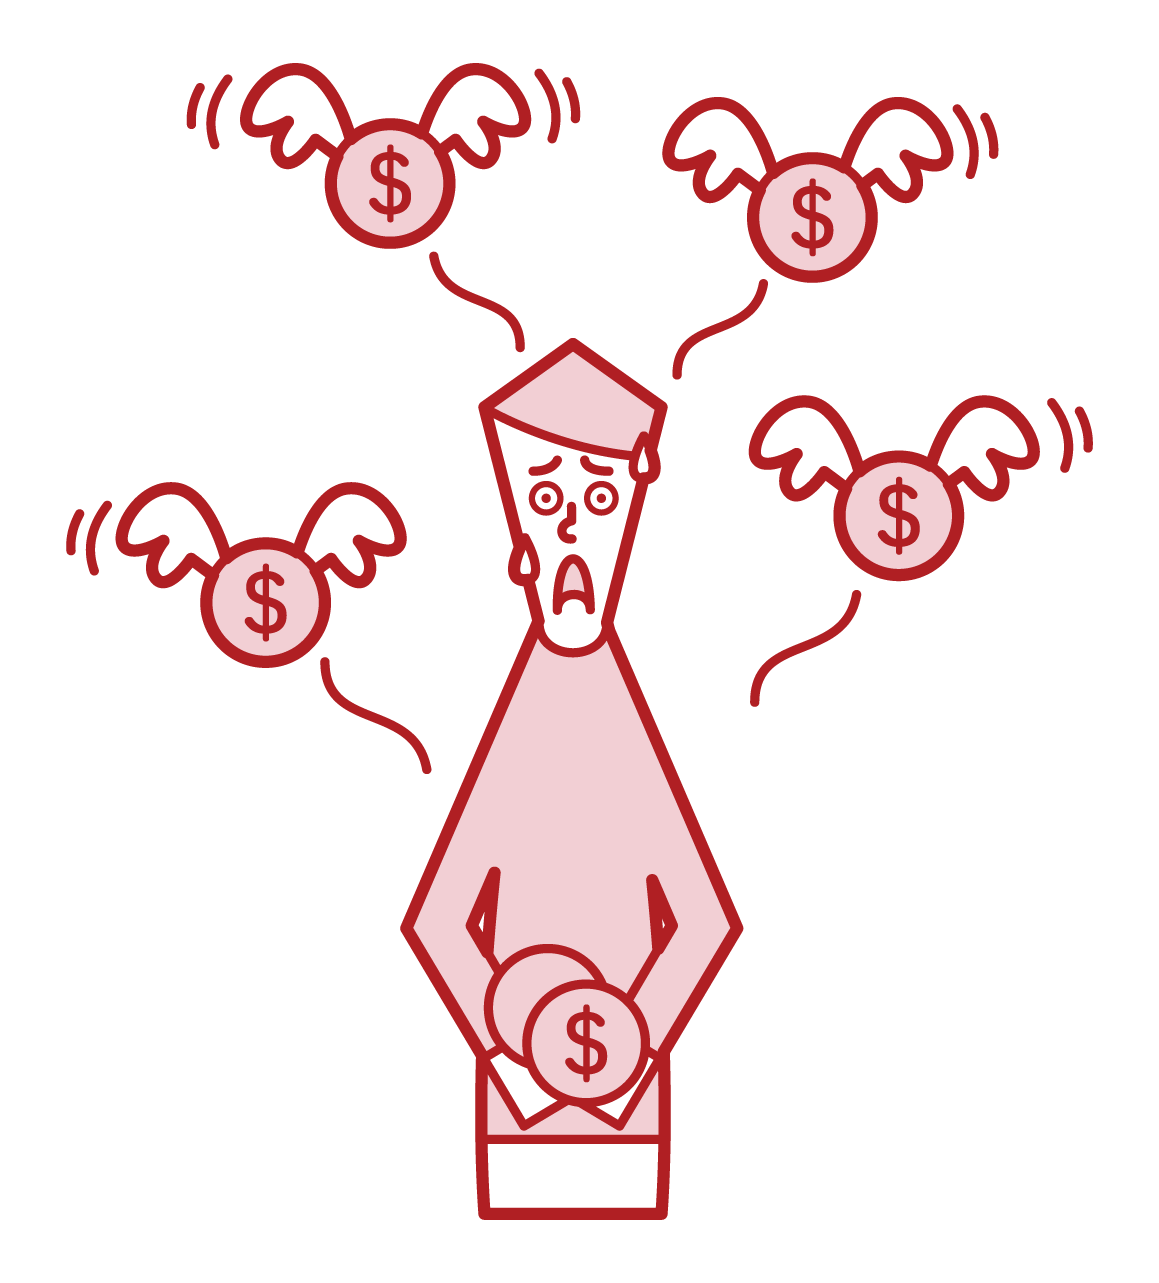 Illustration of a man paying taxes